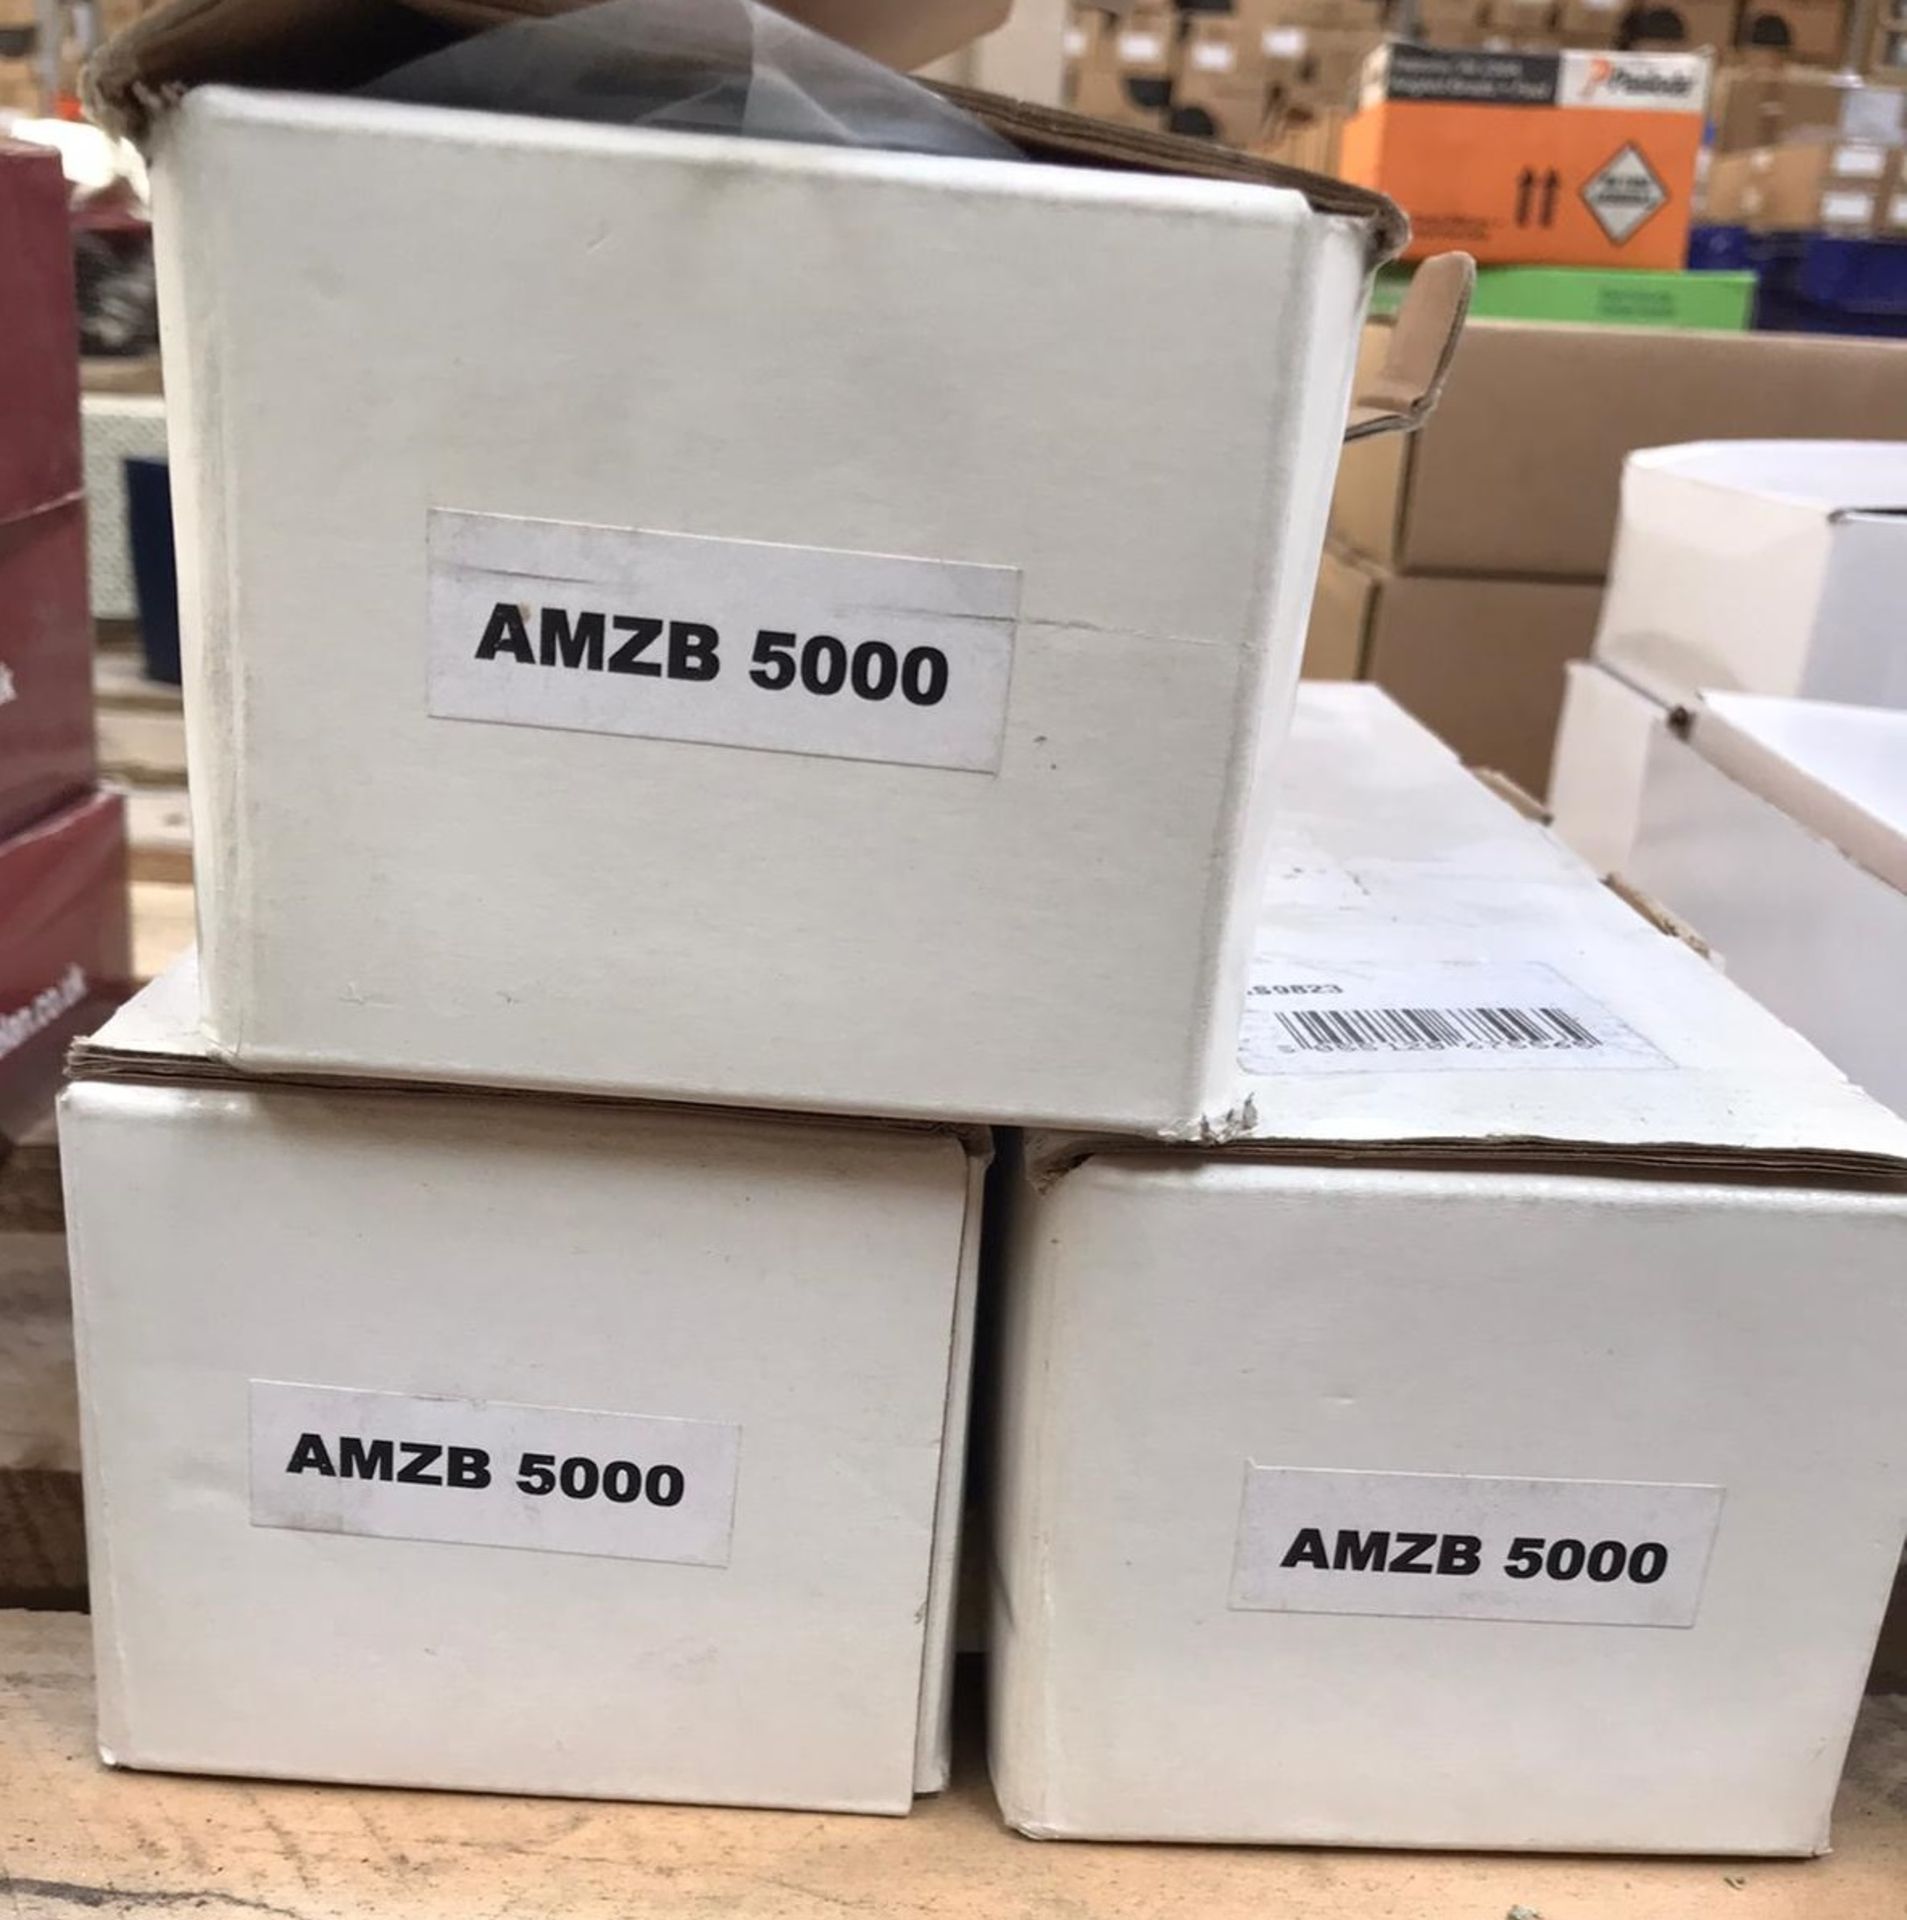 3 x - Brand New Stock - Product Code: AMZB5000 - CL538 - Ref: Pallet in2-43 / PL284 - Location: